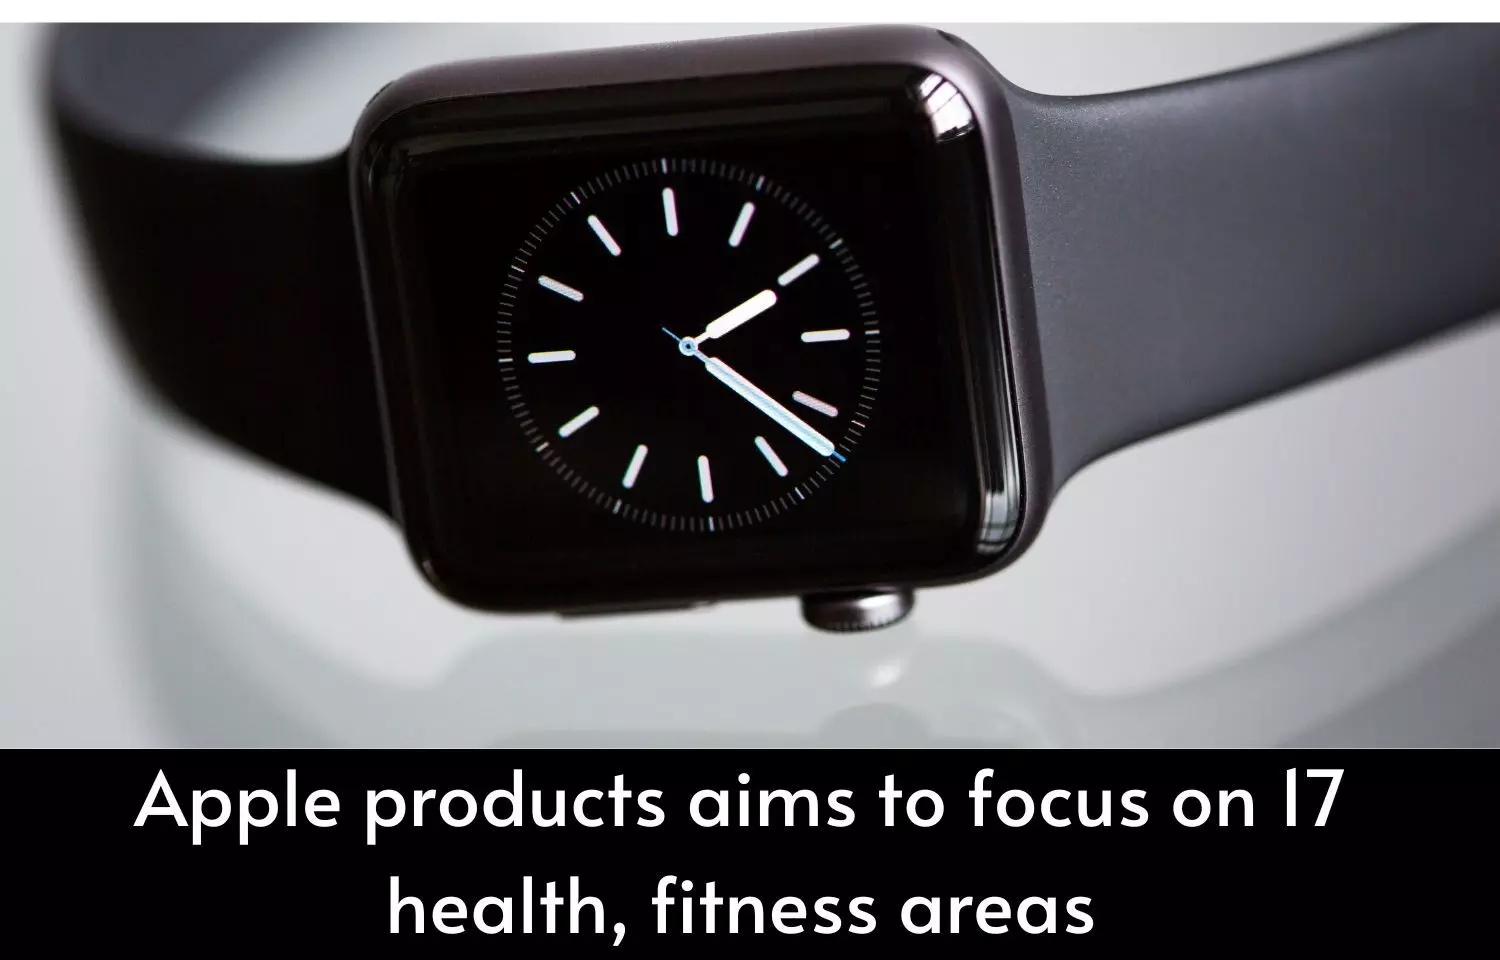 Apple products aim to focus on 17 health, fitness areas